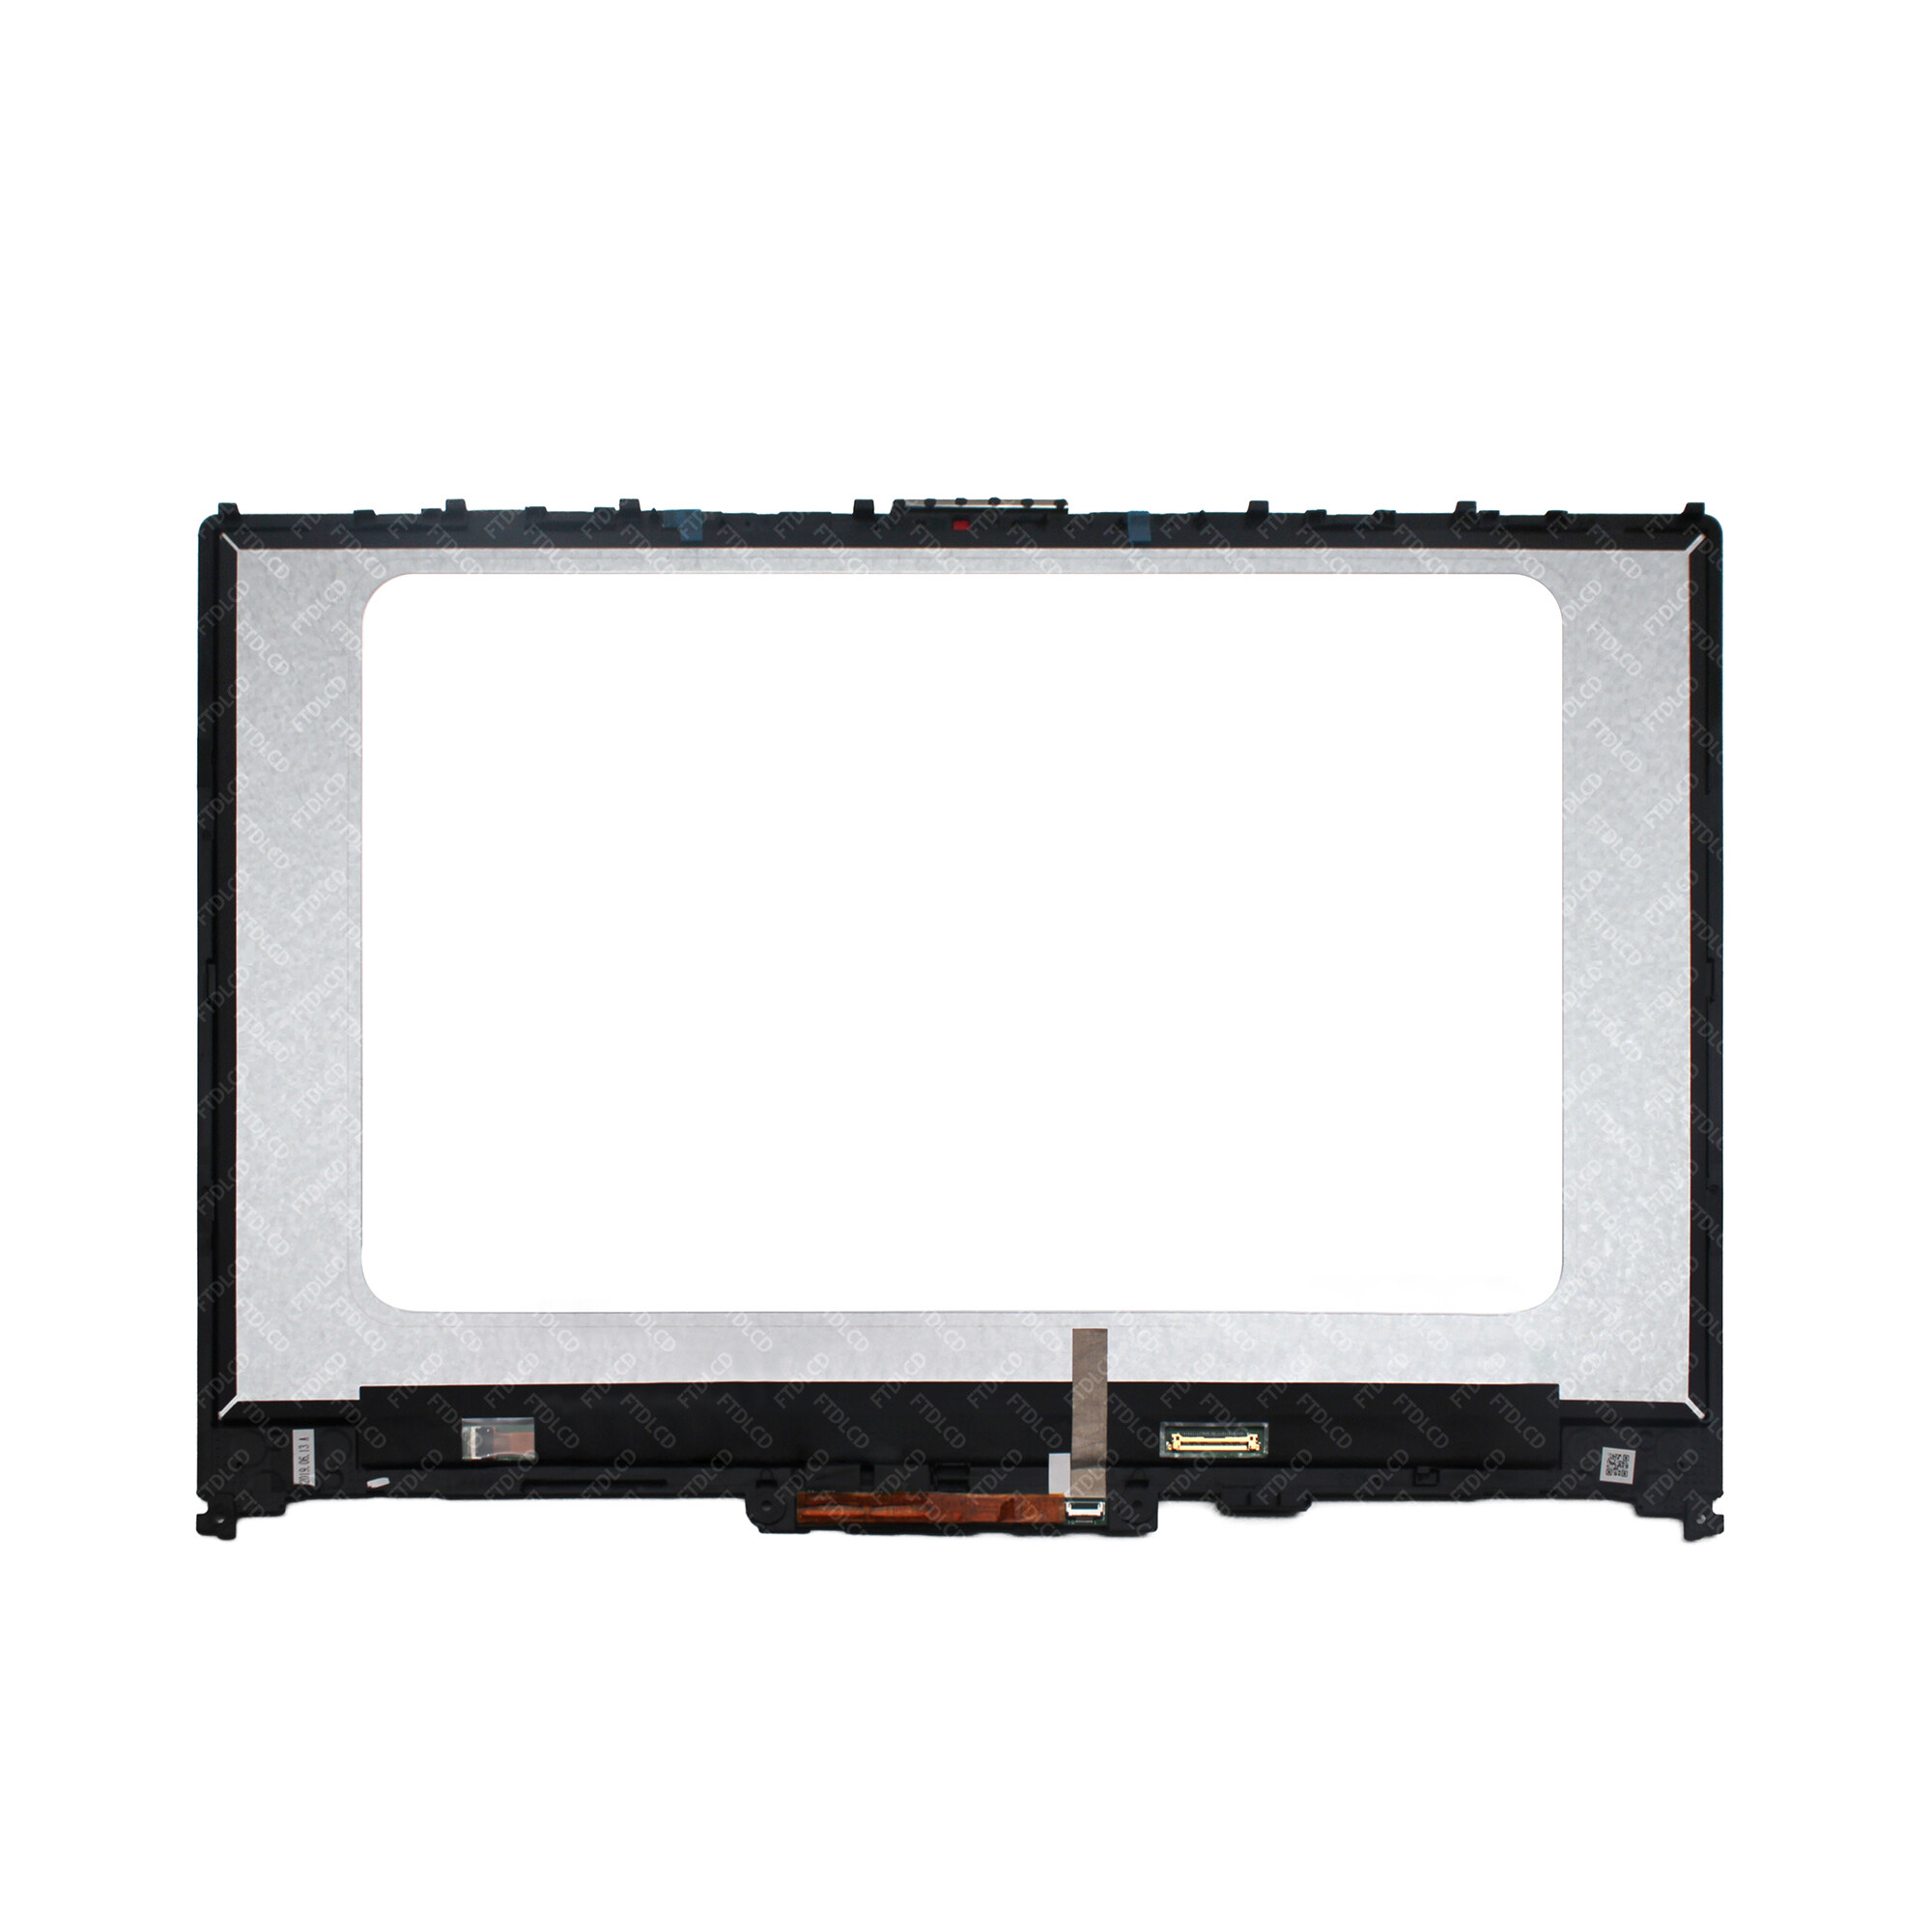 Kreplacement Replacement 15.6 inches FHD IPS LCD Panel Touch Screen Digitizer Assembly Bezel with Touch Control Board for Lenovo Ideapad C340-15IWL C340-15IML C340-15IIL 81N5 81TL 81XJ (Not for Chromebook)